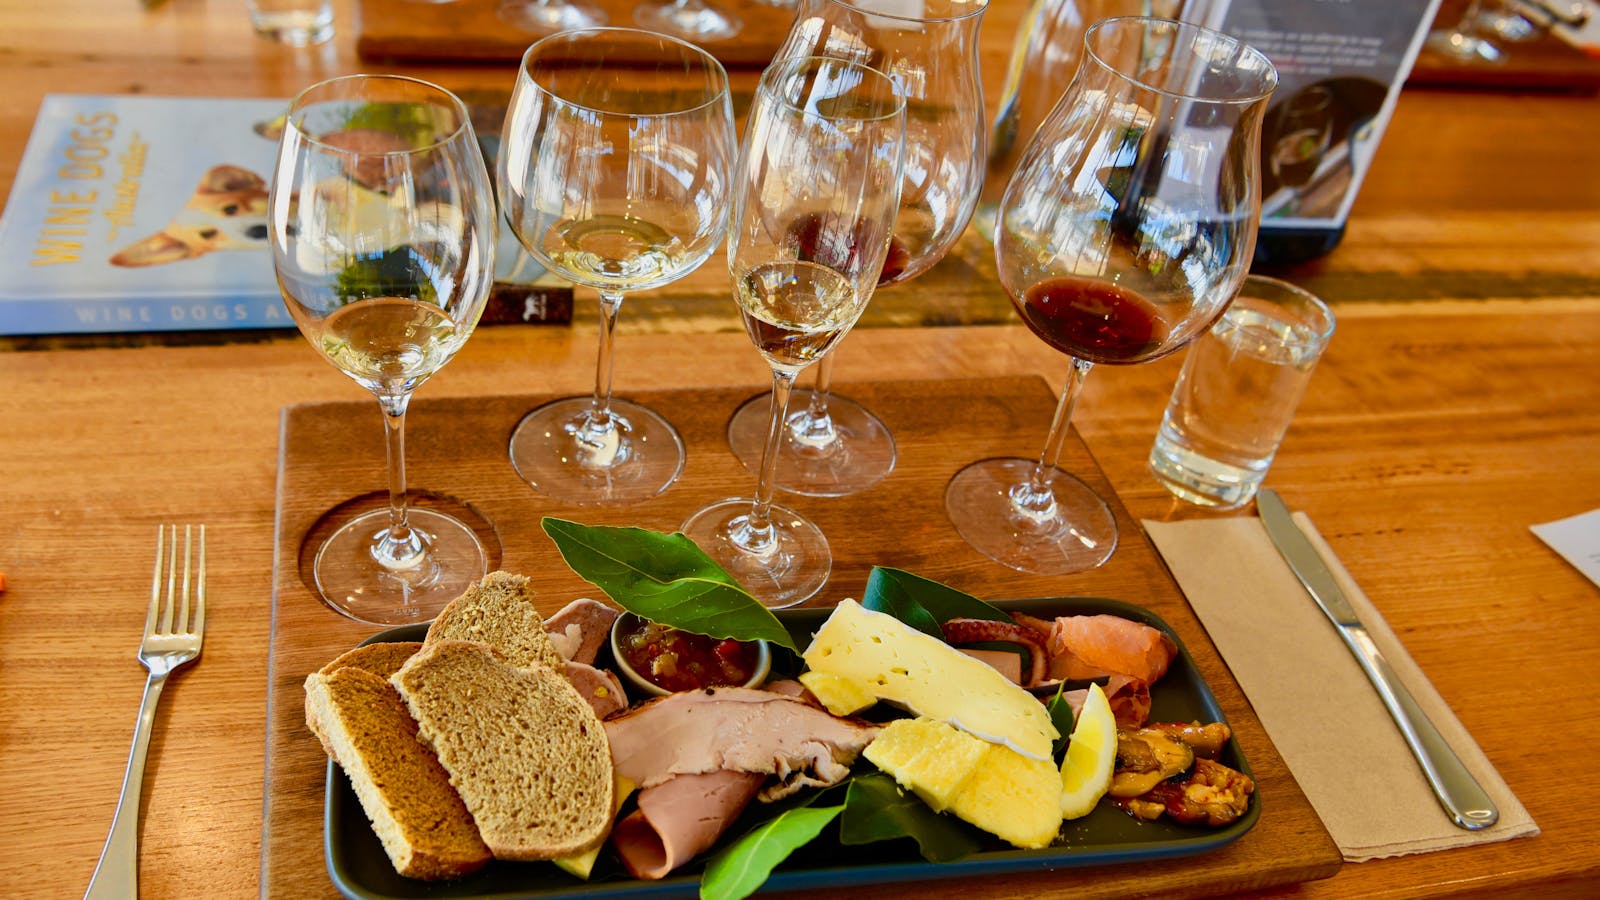 Fun Tassie Tours lunch with wine tastings.